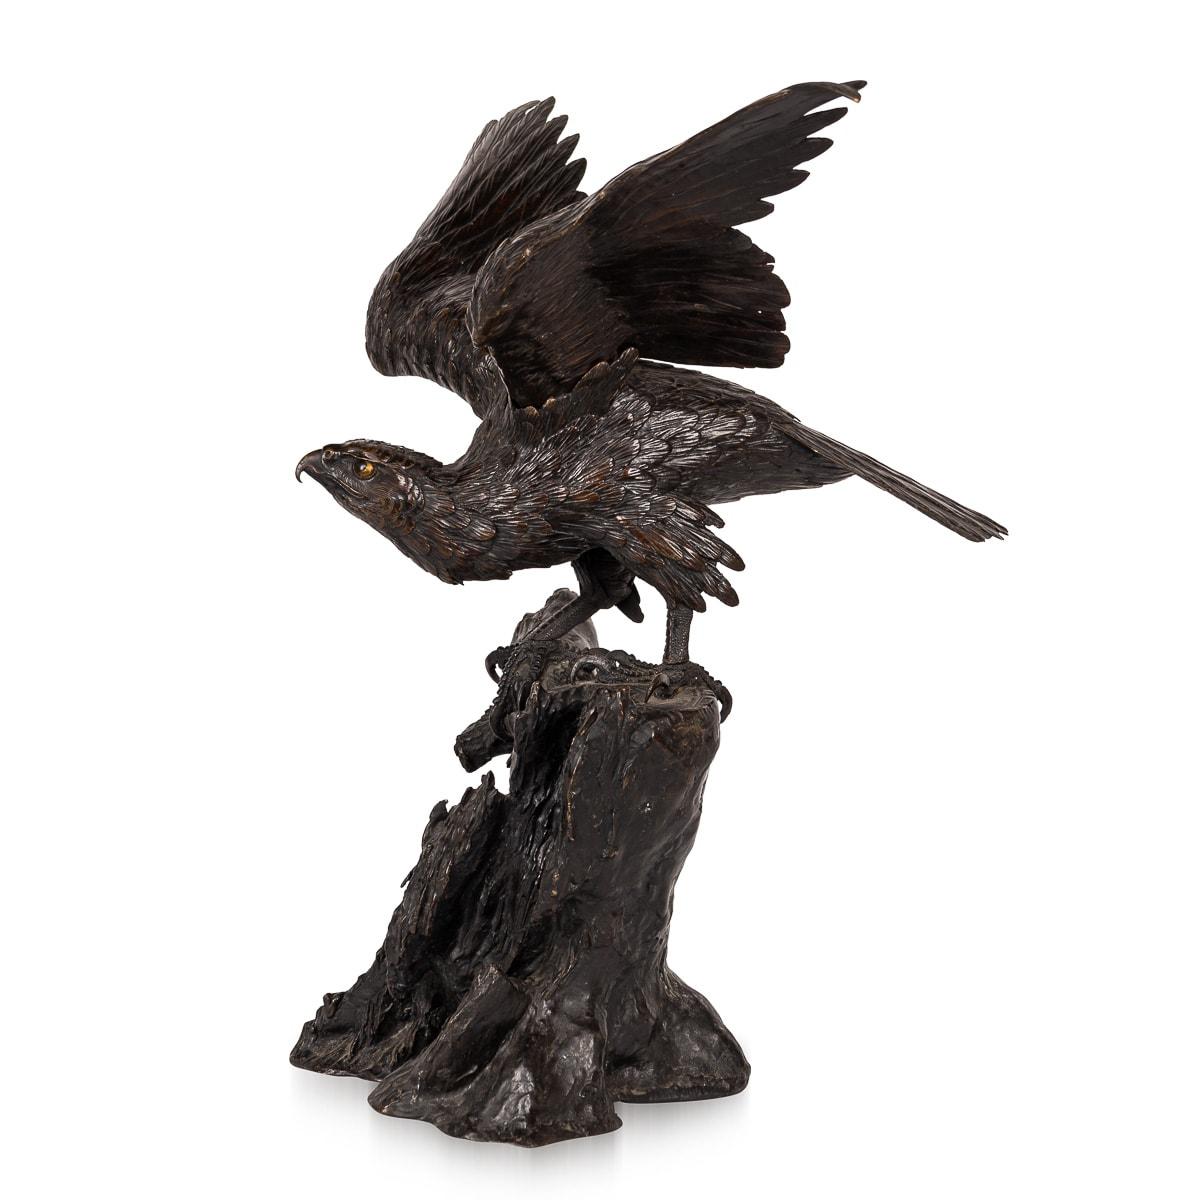 Antique late 19th Century Japanese, grand bronze sculpture of an eagle from the Meiji period, poised atop rocky formations, with its wings gracefully extended. The majestic bird appears vigilant, poised to swoop down and seize its prey. Its head